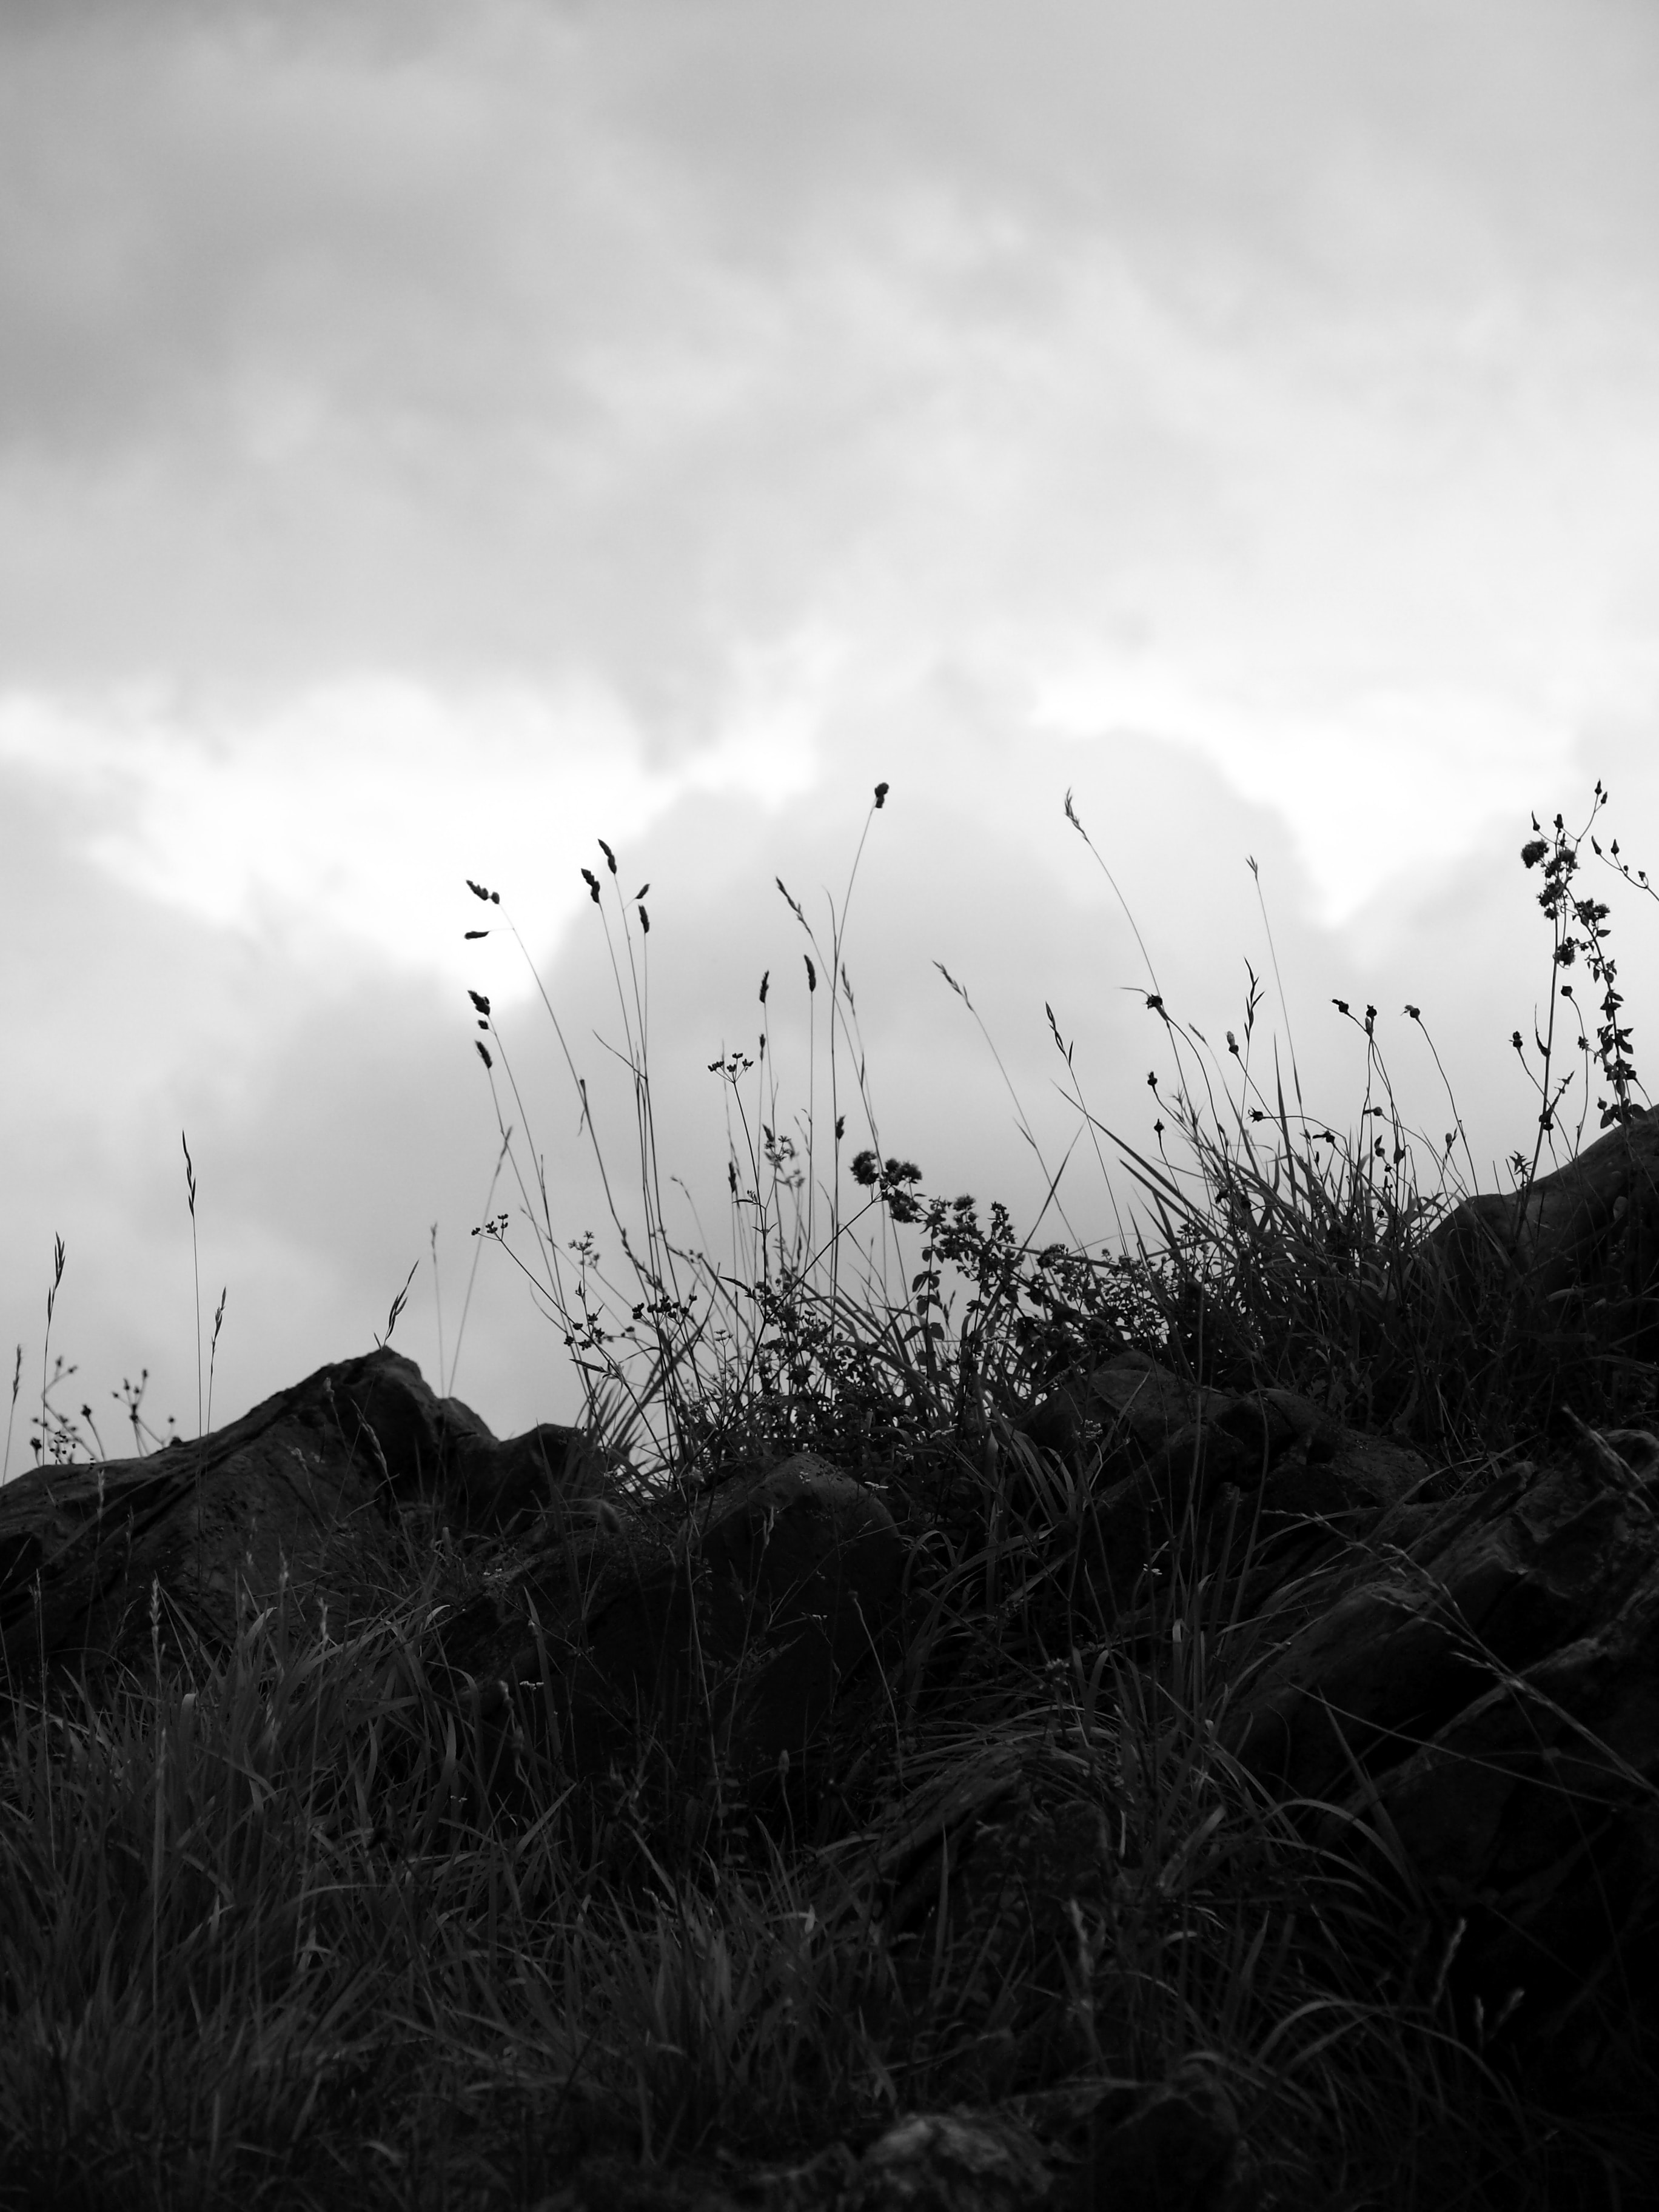 clouds, nature, grass, stones, sky, bw, chb, hill 1080p